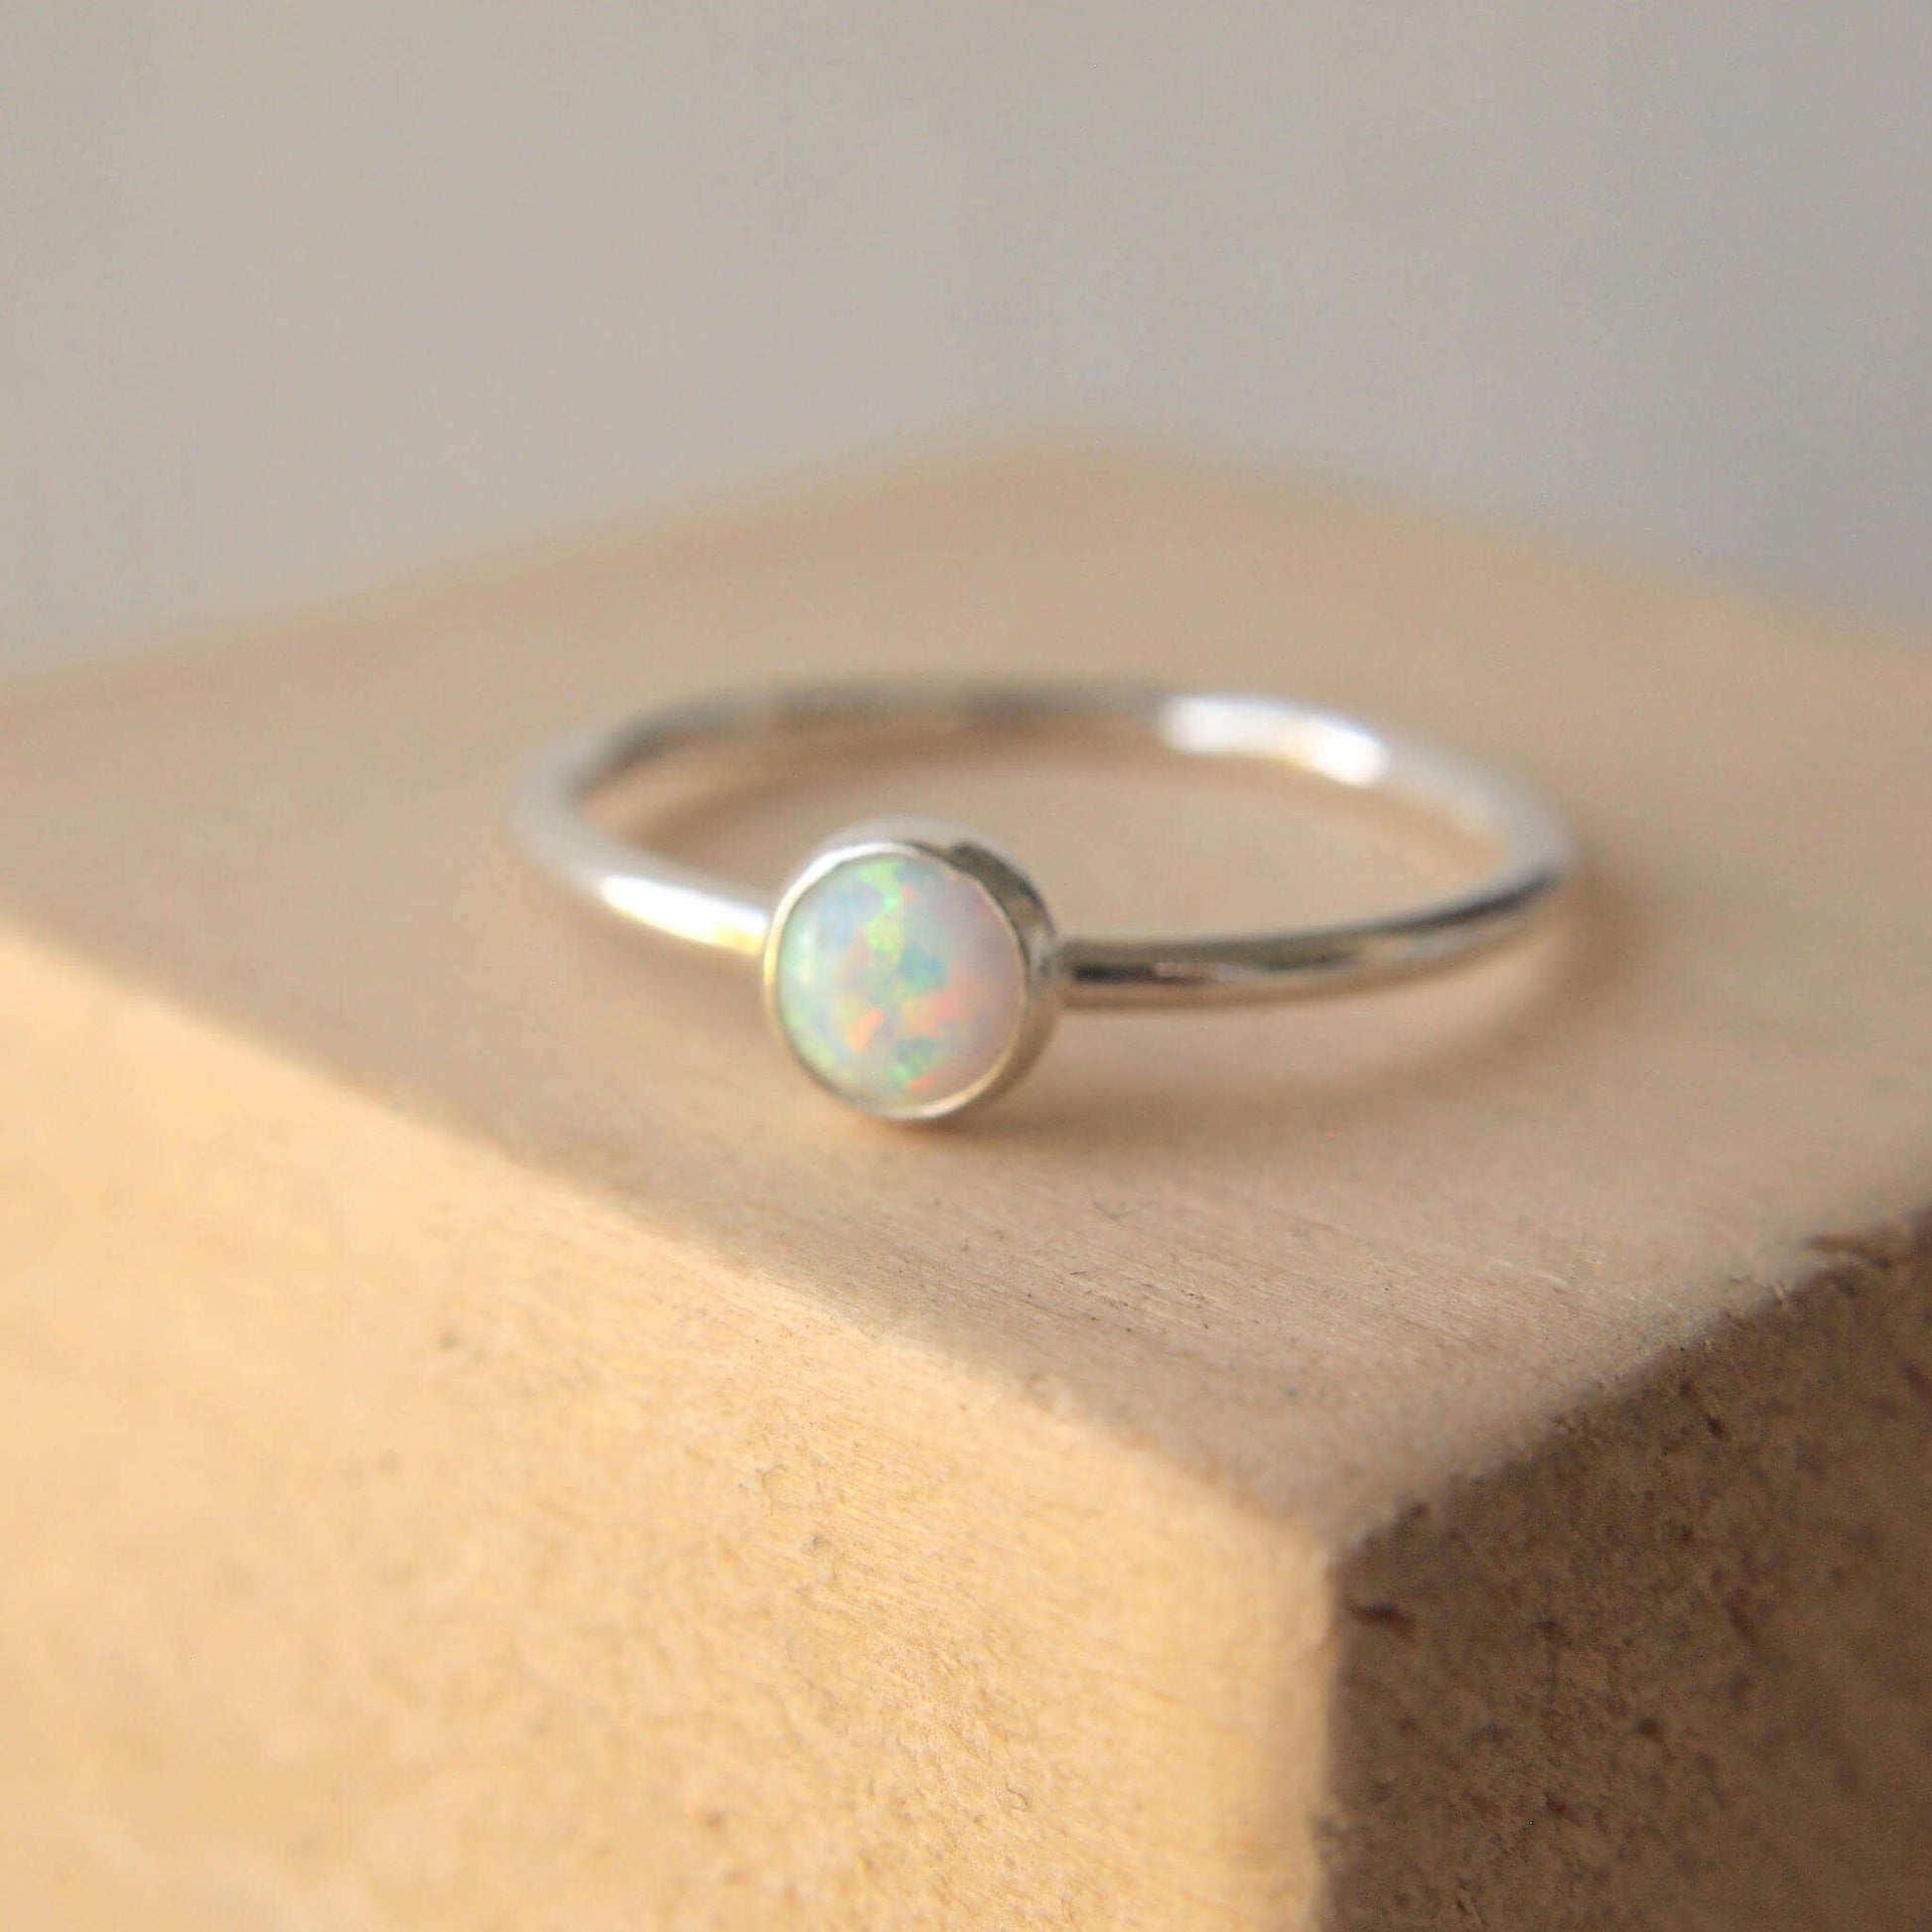 Lab Opal Ring. A 5mm round cabochon in a white synthetic Opal, birthstone for October set very simply onto a round band of sterling silver. Handmade by maram jewellery in Scotland